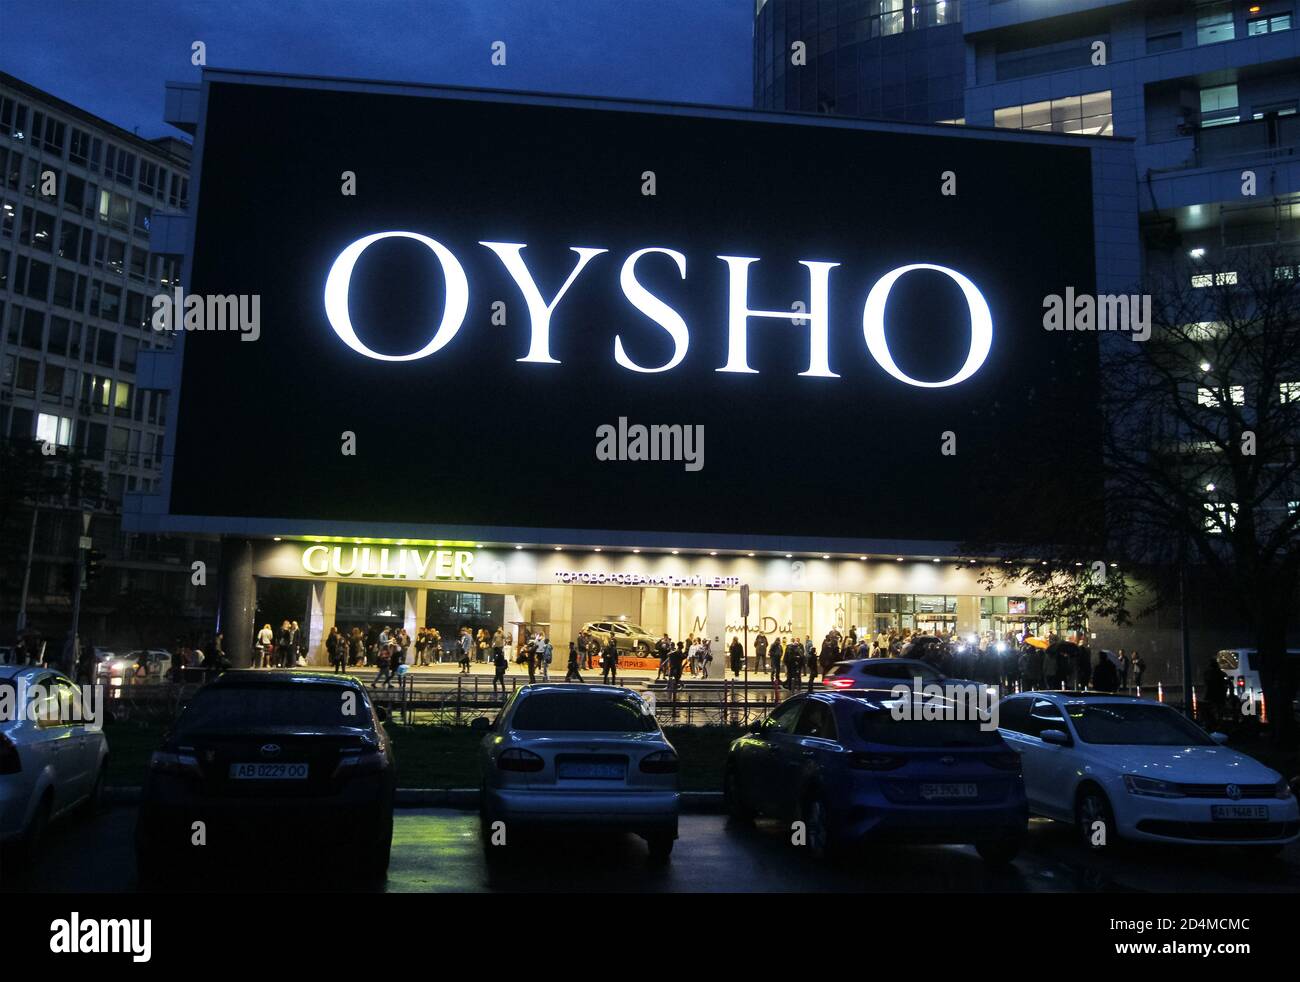 Oysho Images :: Photos, videos, logos, illustrations and branding